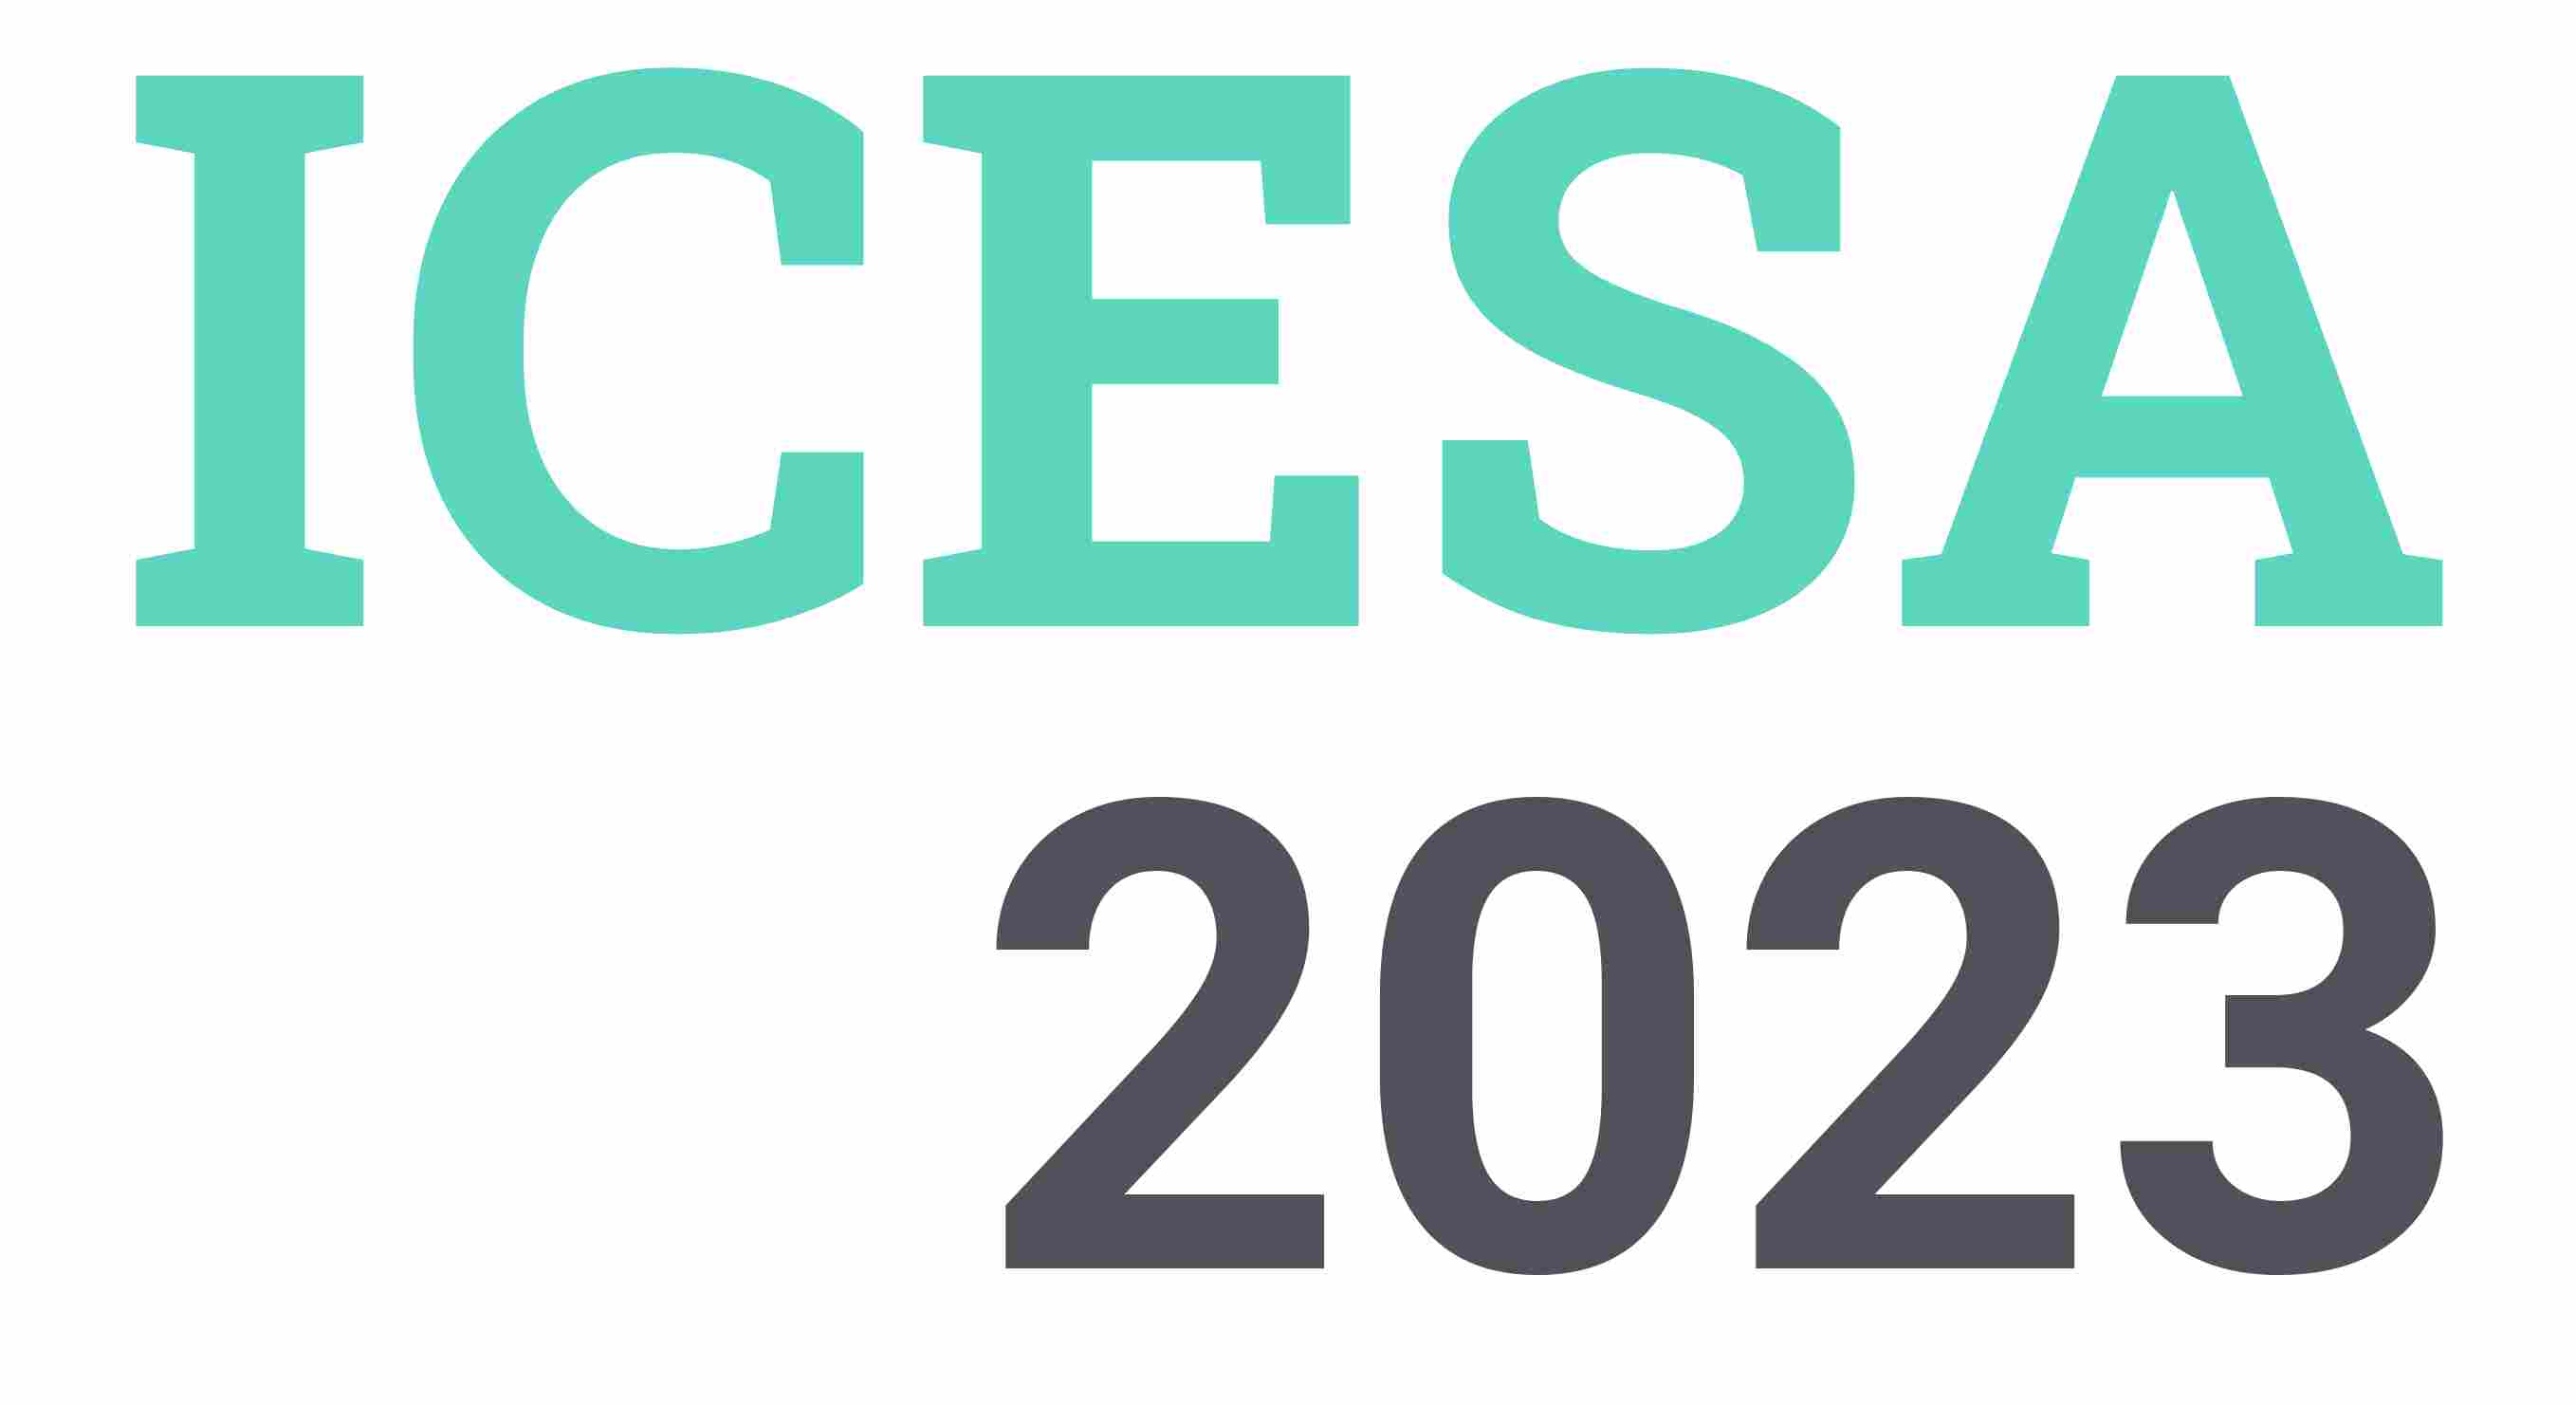 4<sup>th</sup> International Conference on Environmental Science and Applications (ICESA'24), Lisbon, Portugal, December 4 - 6, 2023